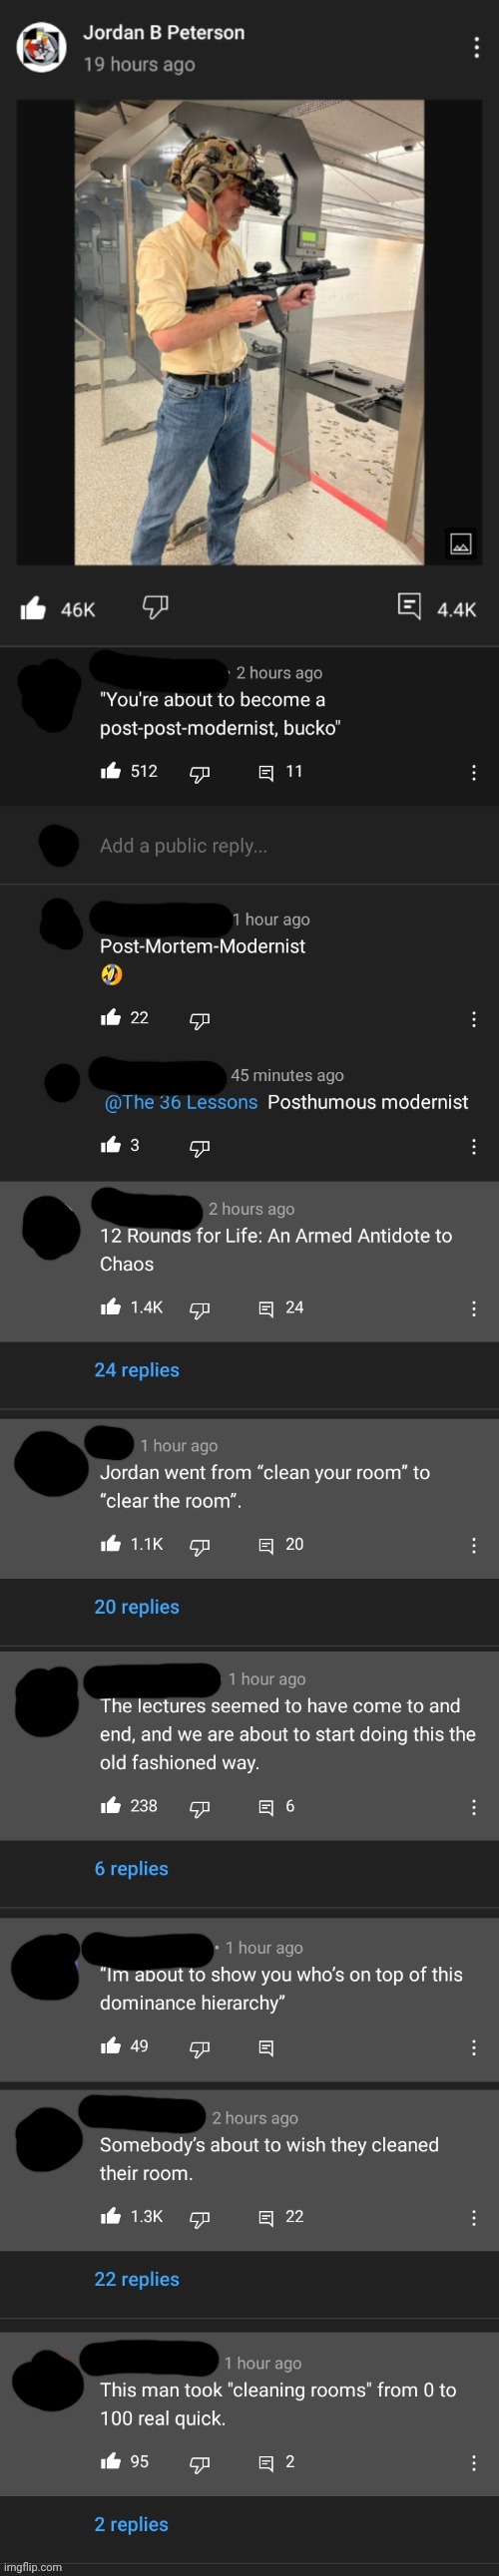 Imagined hearing Kermit the Frog's voice shouting, "Clear the room!" as bullets fly | image tagged in cursed comments,jordan peterson,clean your room,guns,hail lobster | made w/ Imgflip meme maker